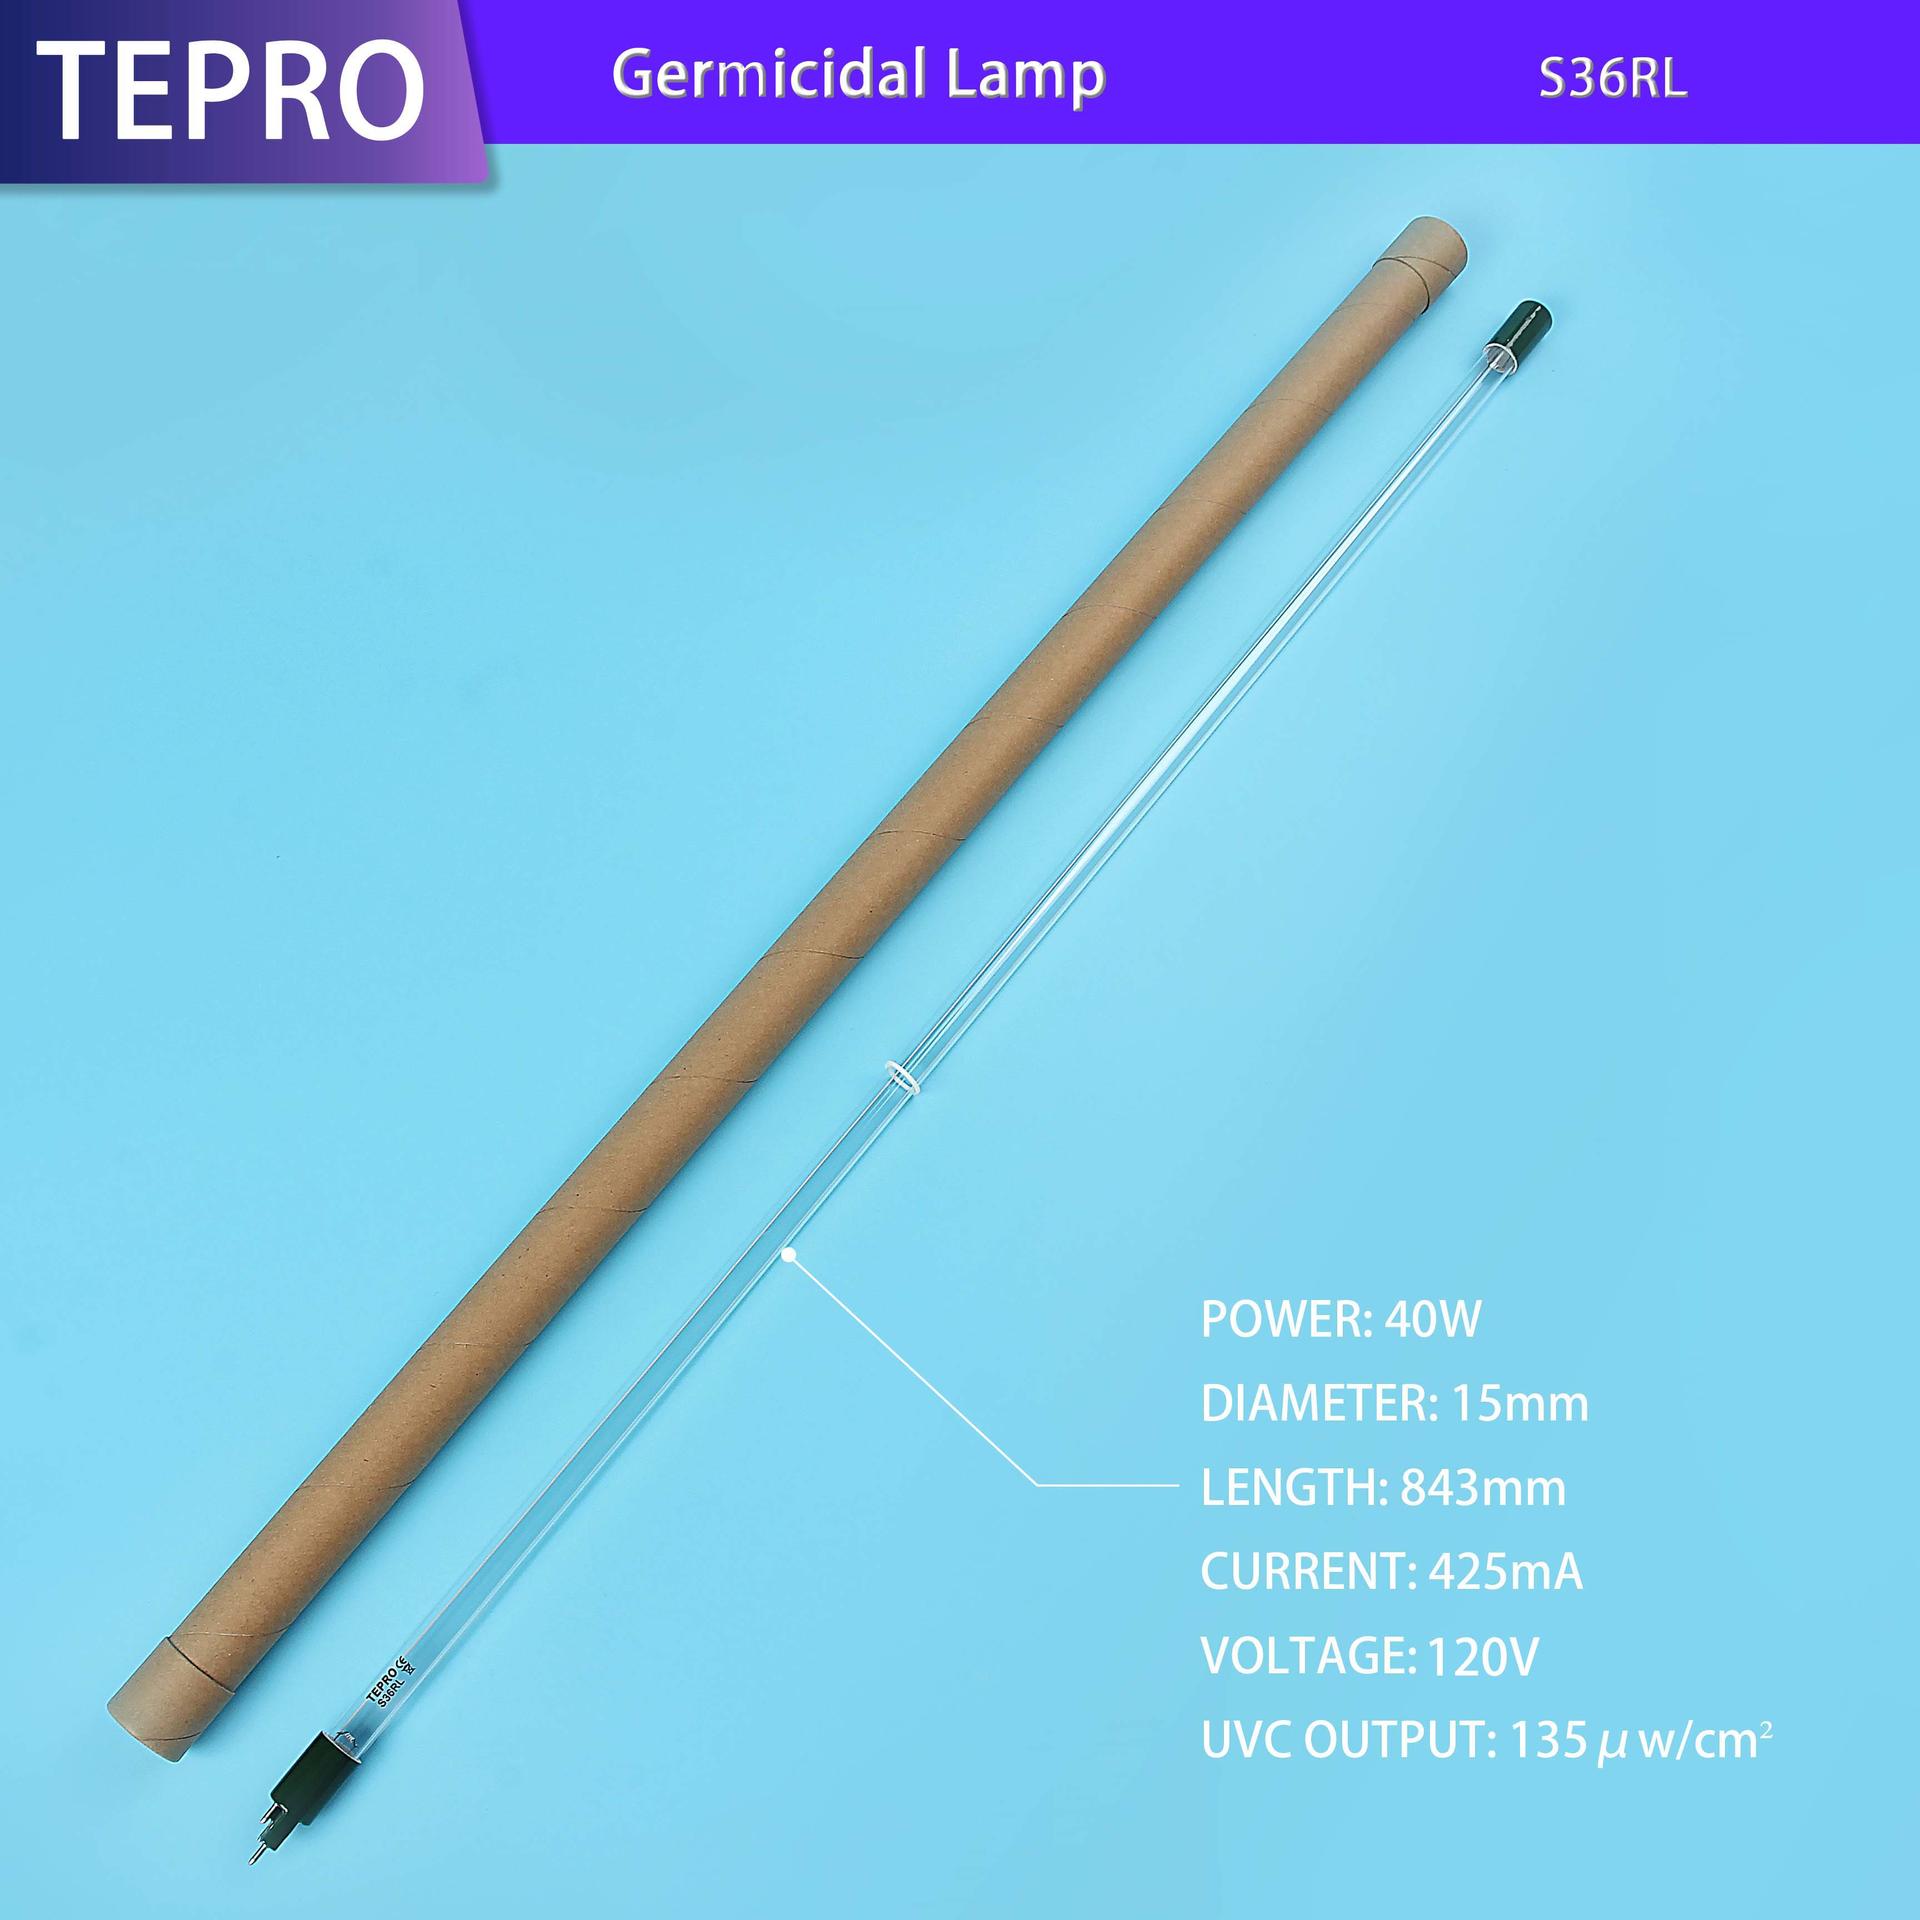 New uvb lamp reptile 18w suppliers for nails